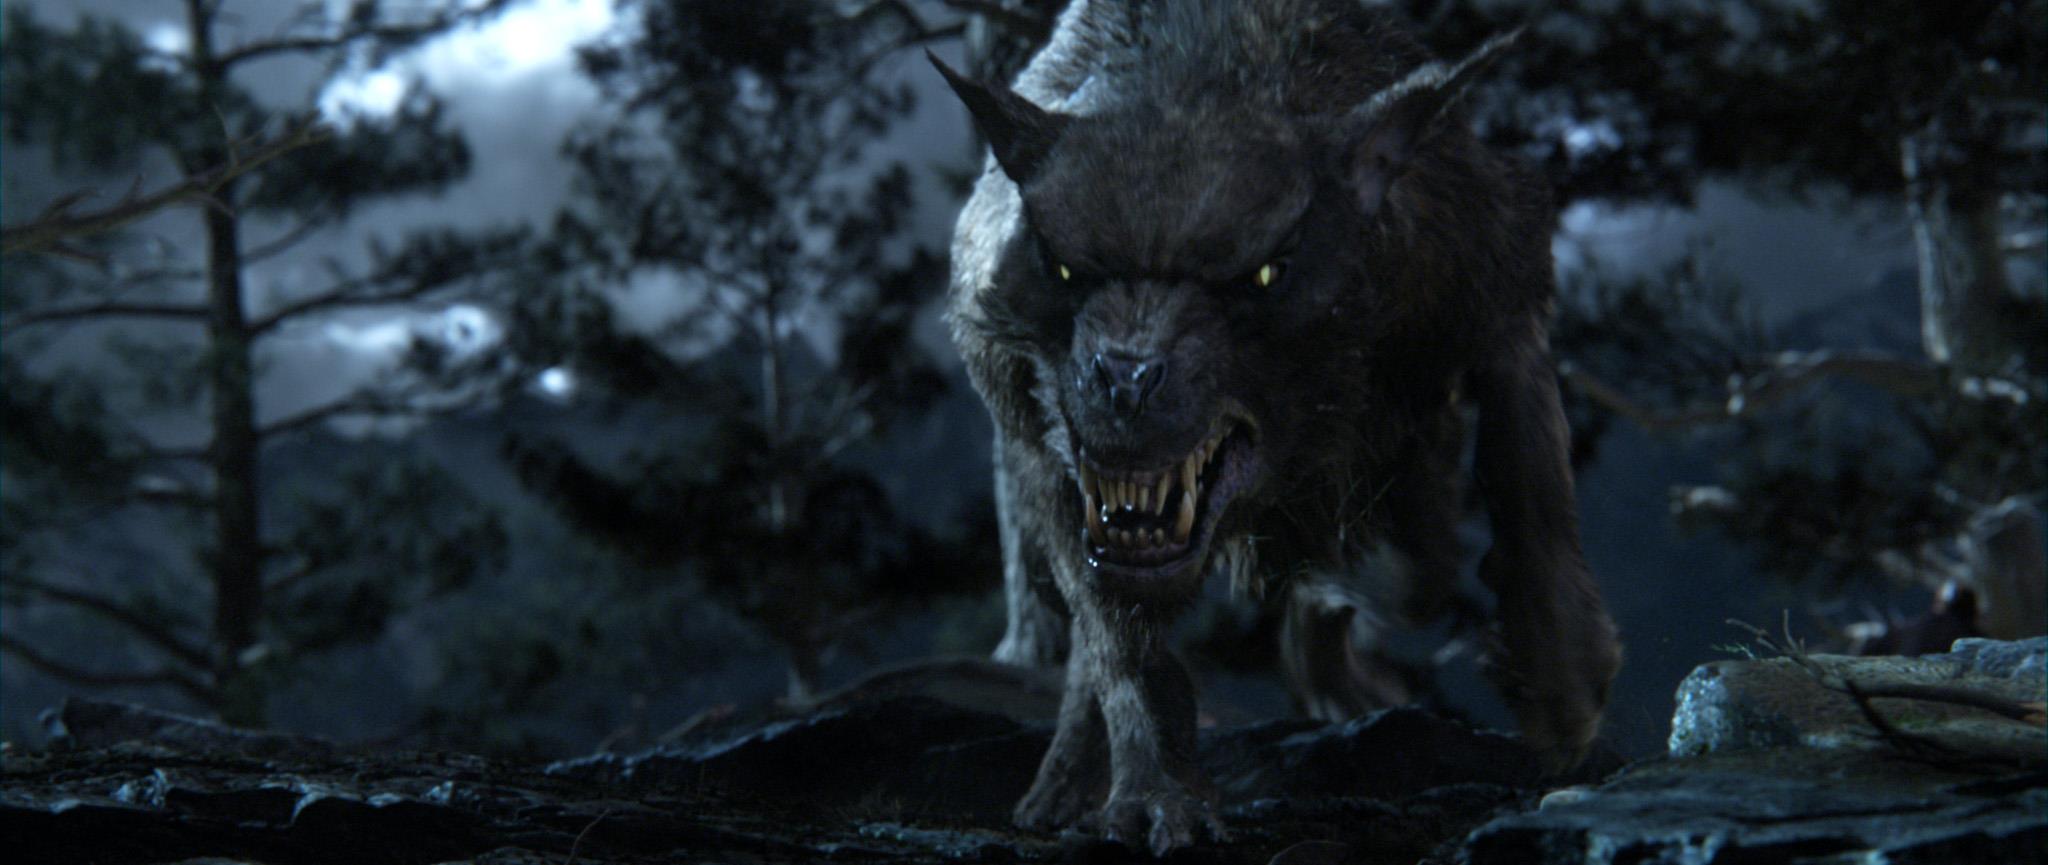 Wargs | The One Wiki to Rule Them All | Fandom